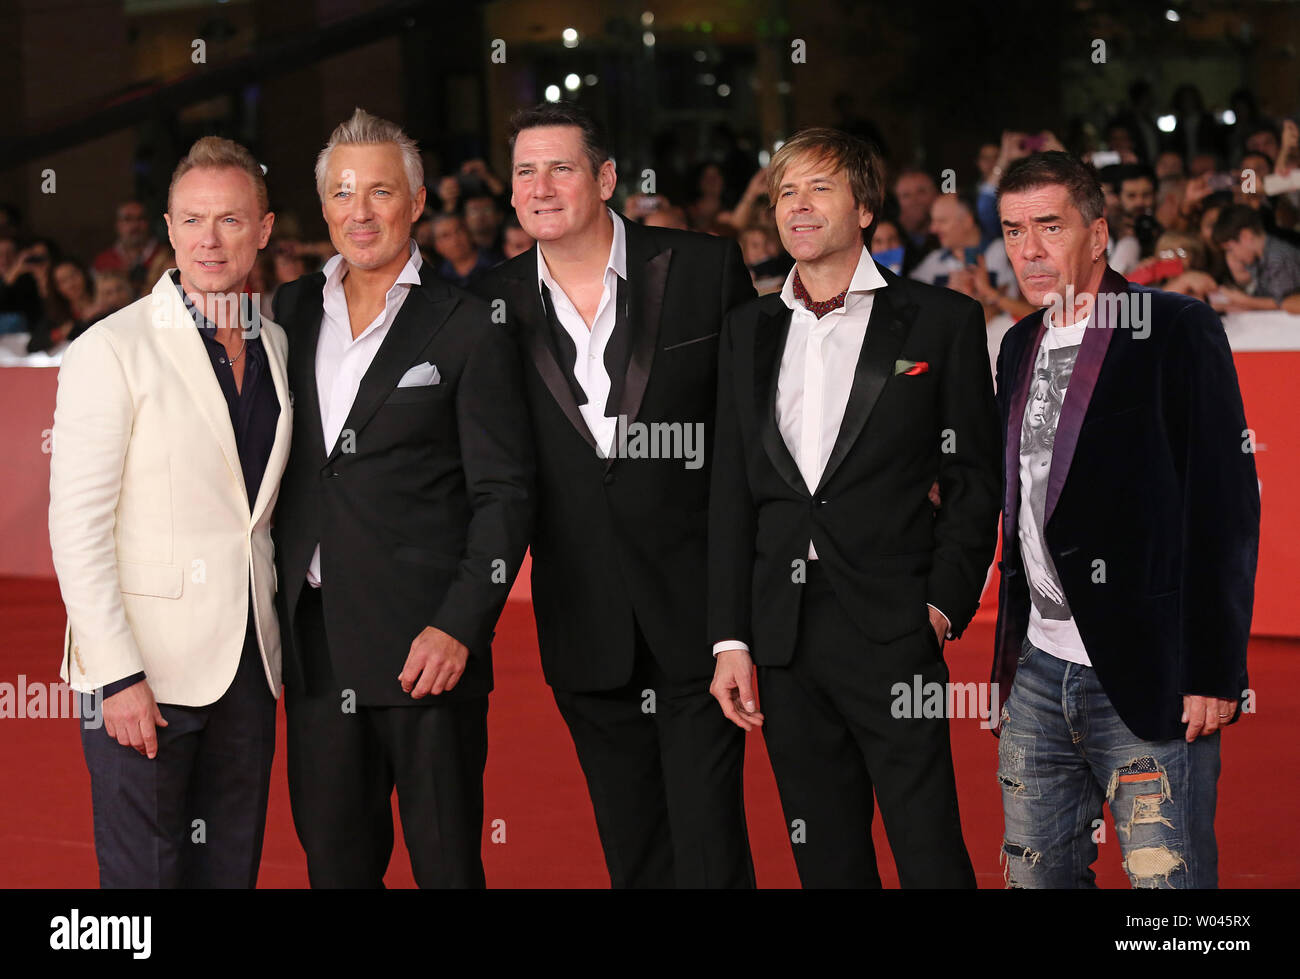 (From L to R) Gary Kemp, Martin Kemp, Steve Norman, Tony Hadley and John Keeble of Spandau Ballet arrive on the red carpet before the screening of the film 'Soul Boys of the Western World' at the 9th annual Rome International Film Festival in Rome on October 20, 2014.   UPI/David Silpa Stock Photo